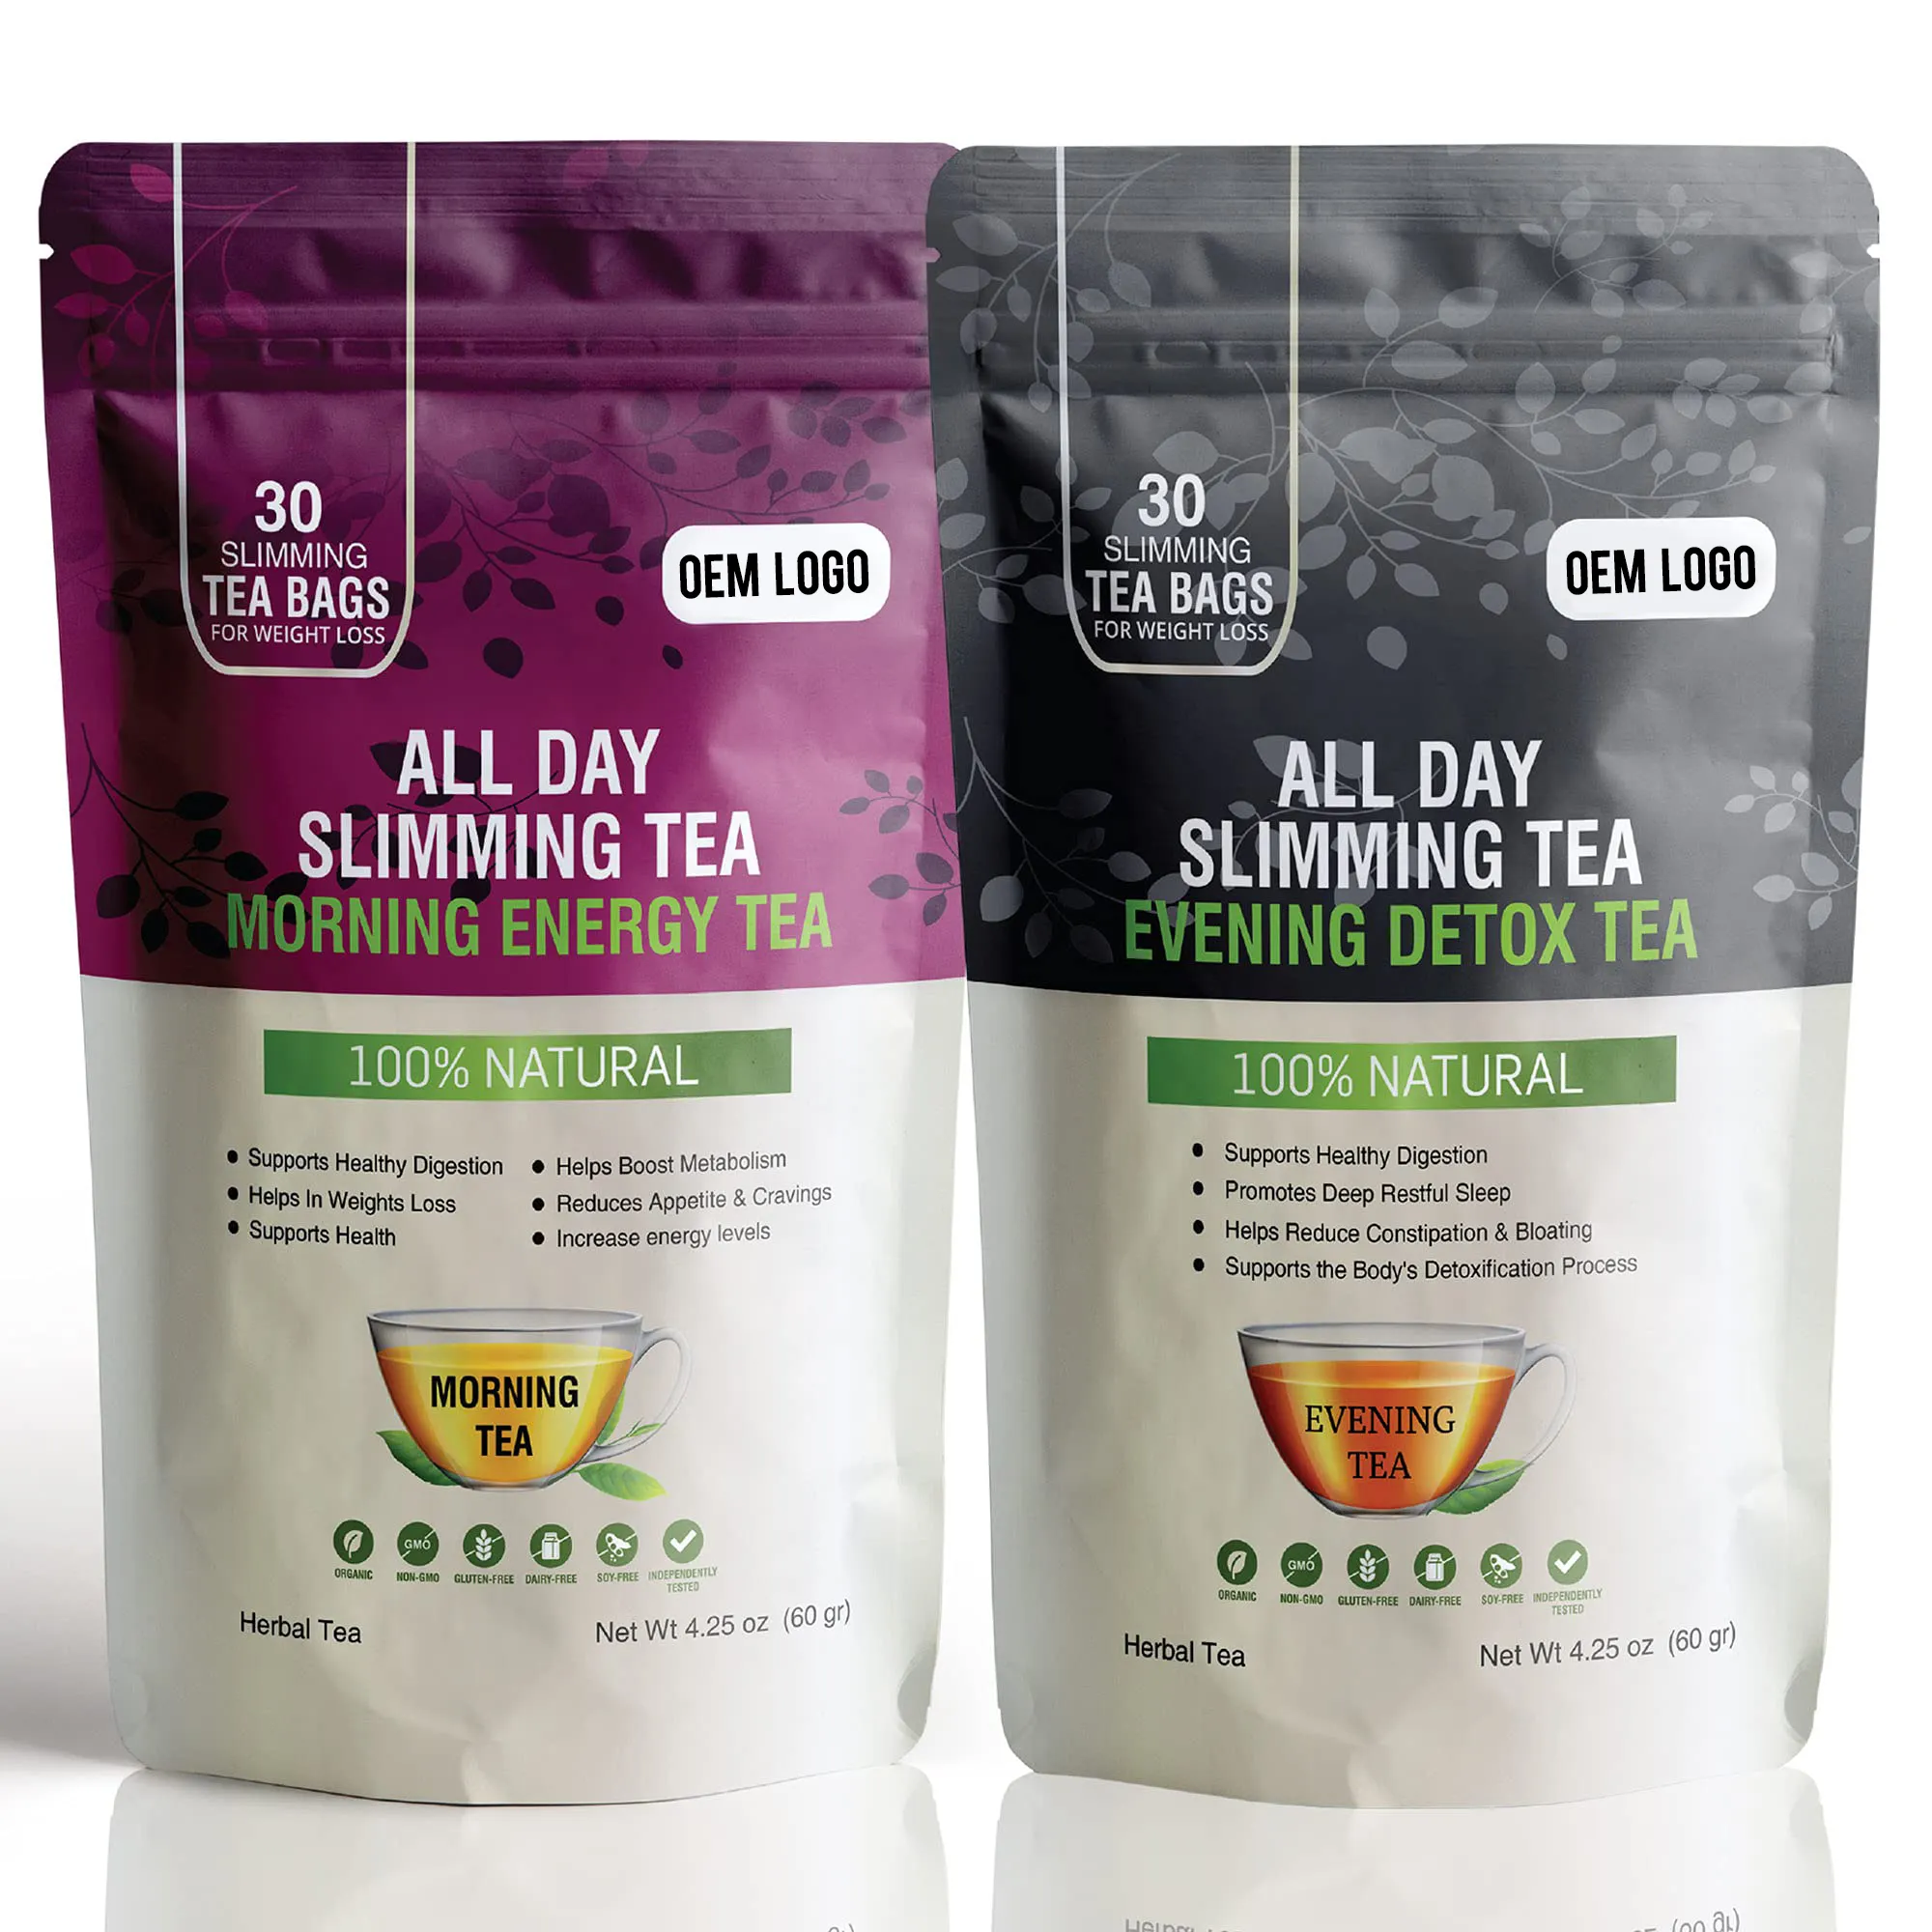 Herbs All Natural Slimming Products for Weight Loss Gain Vitamins and Supplements Products 30 Days Detox Tea Coffee